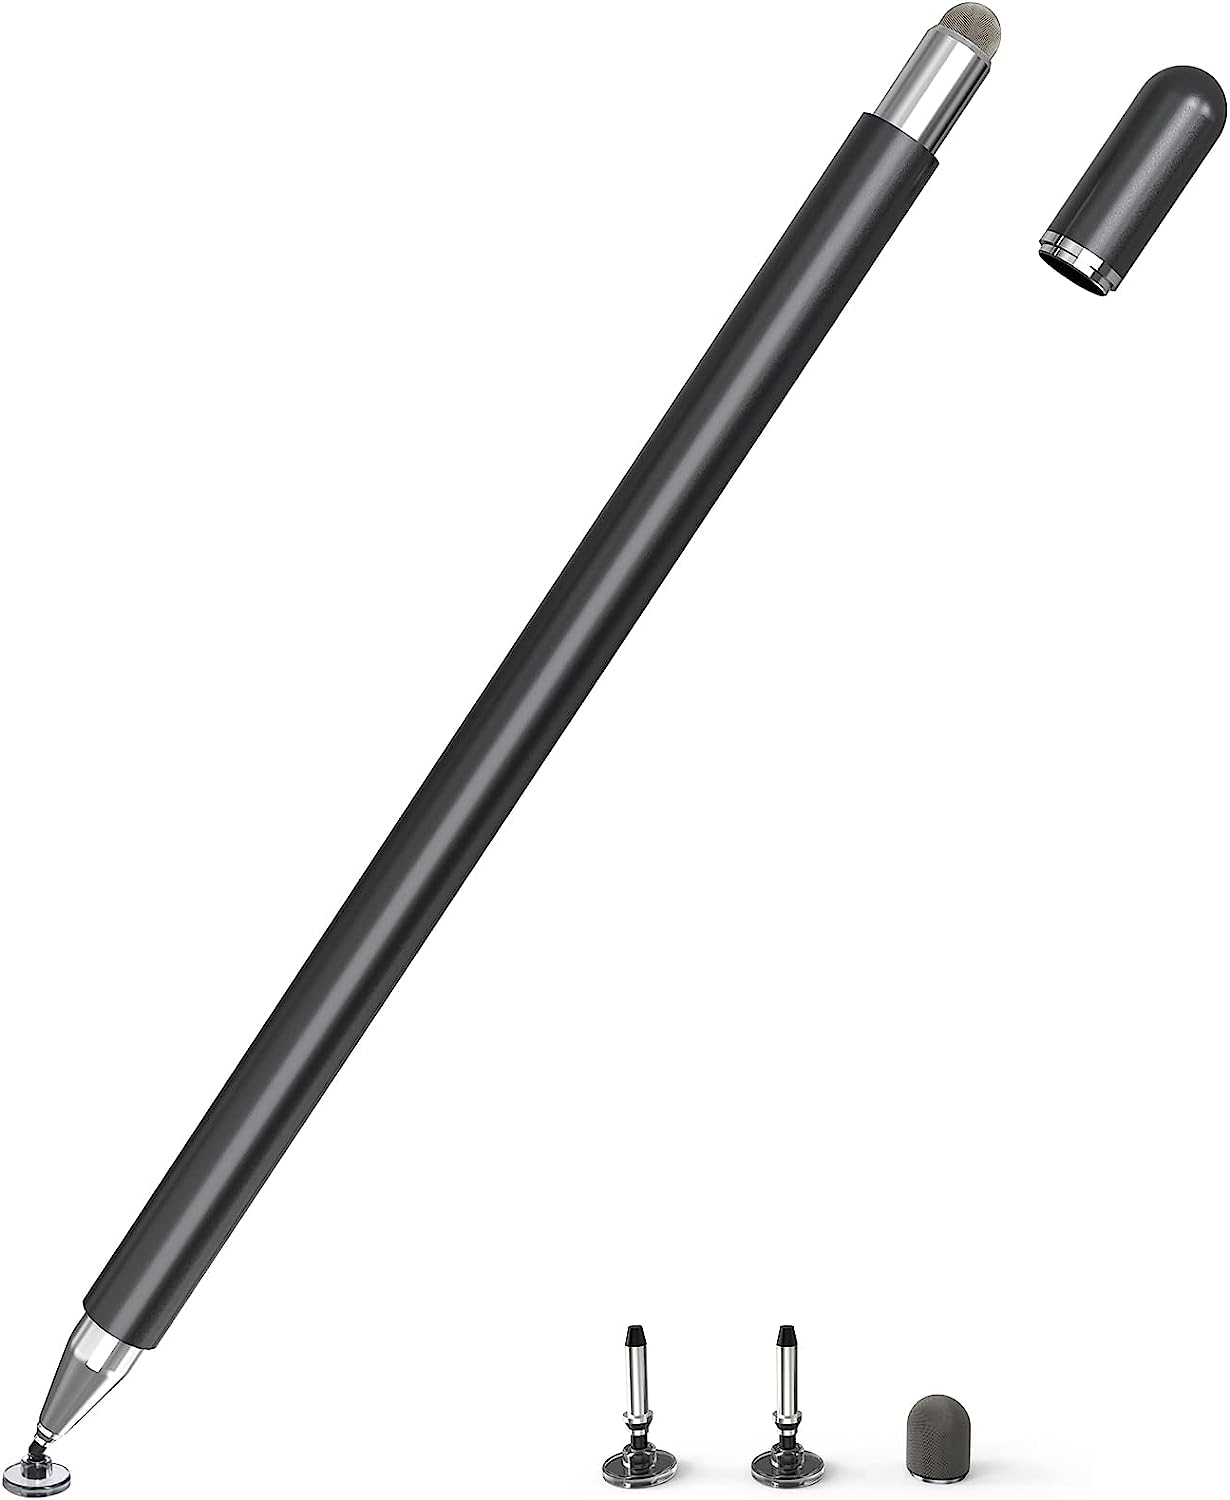 Stylus Pen for Touch Screens, IOS and Android